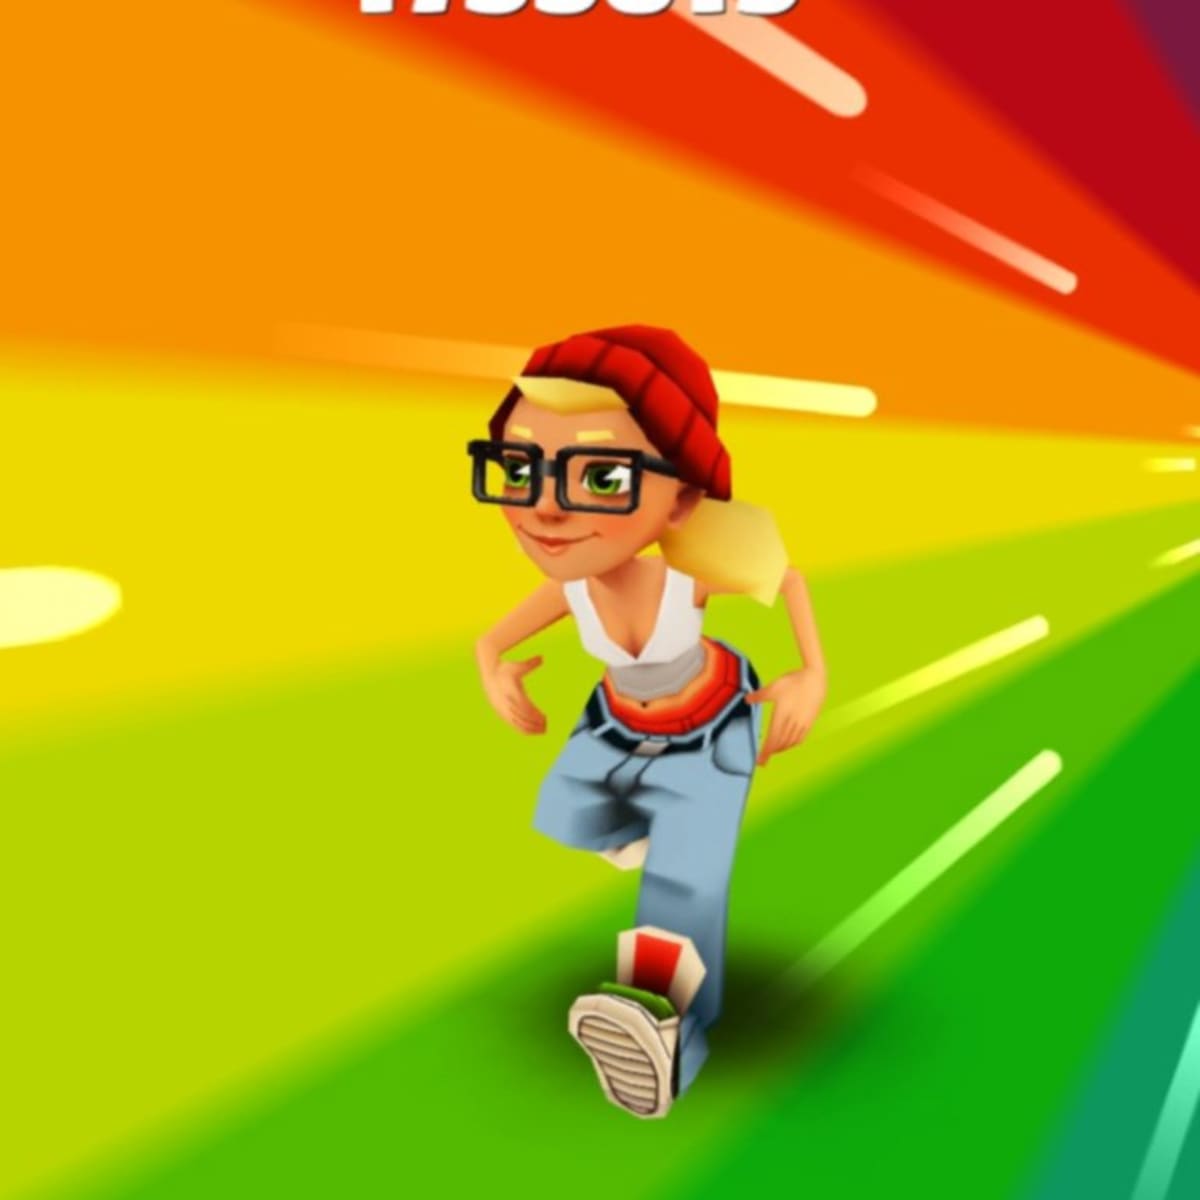 How to Get a Score of Over 1 Million in Subway Surfers - LevelSkip